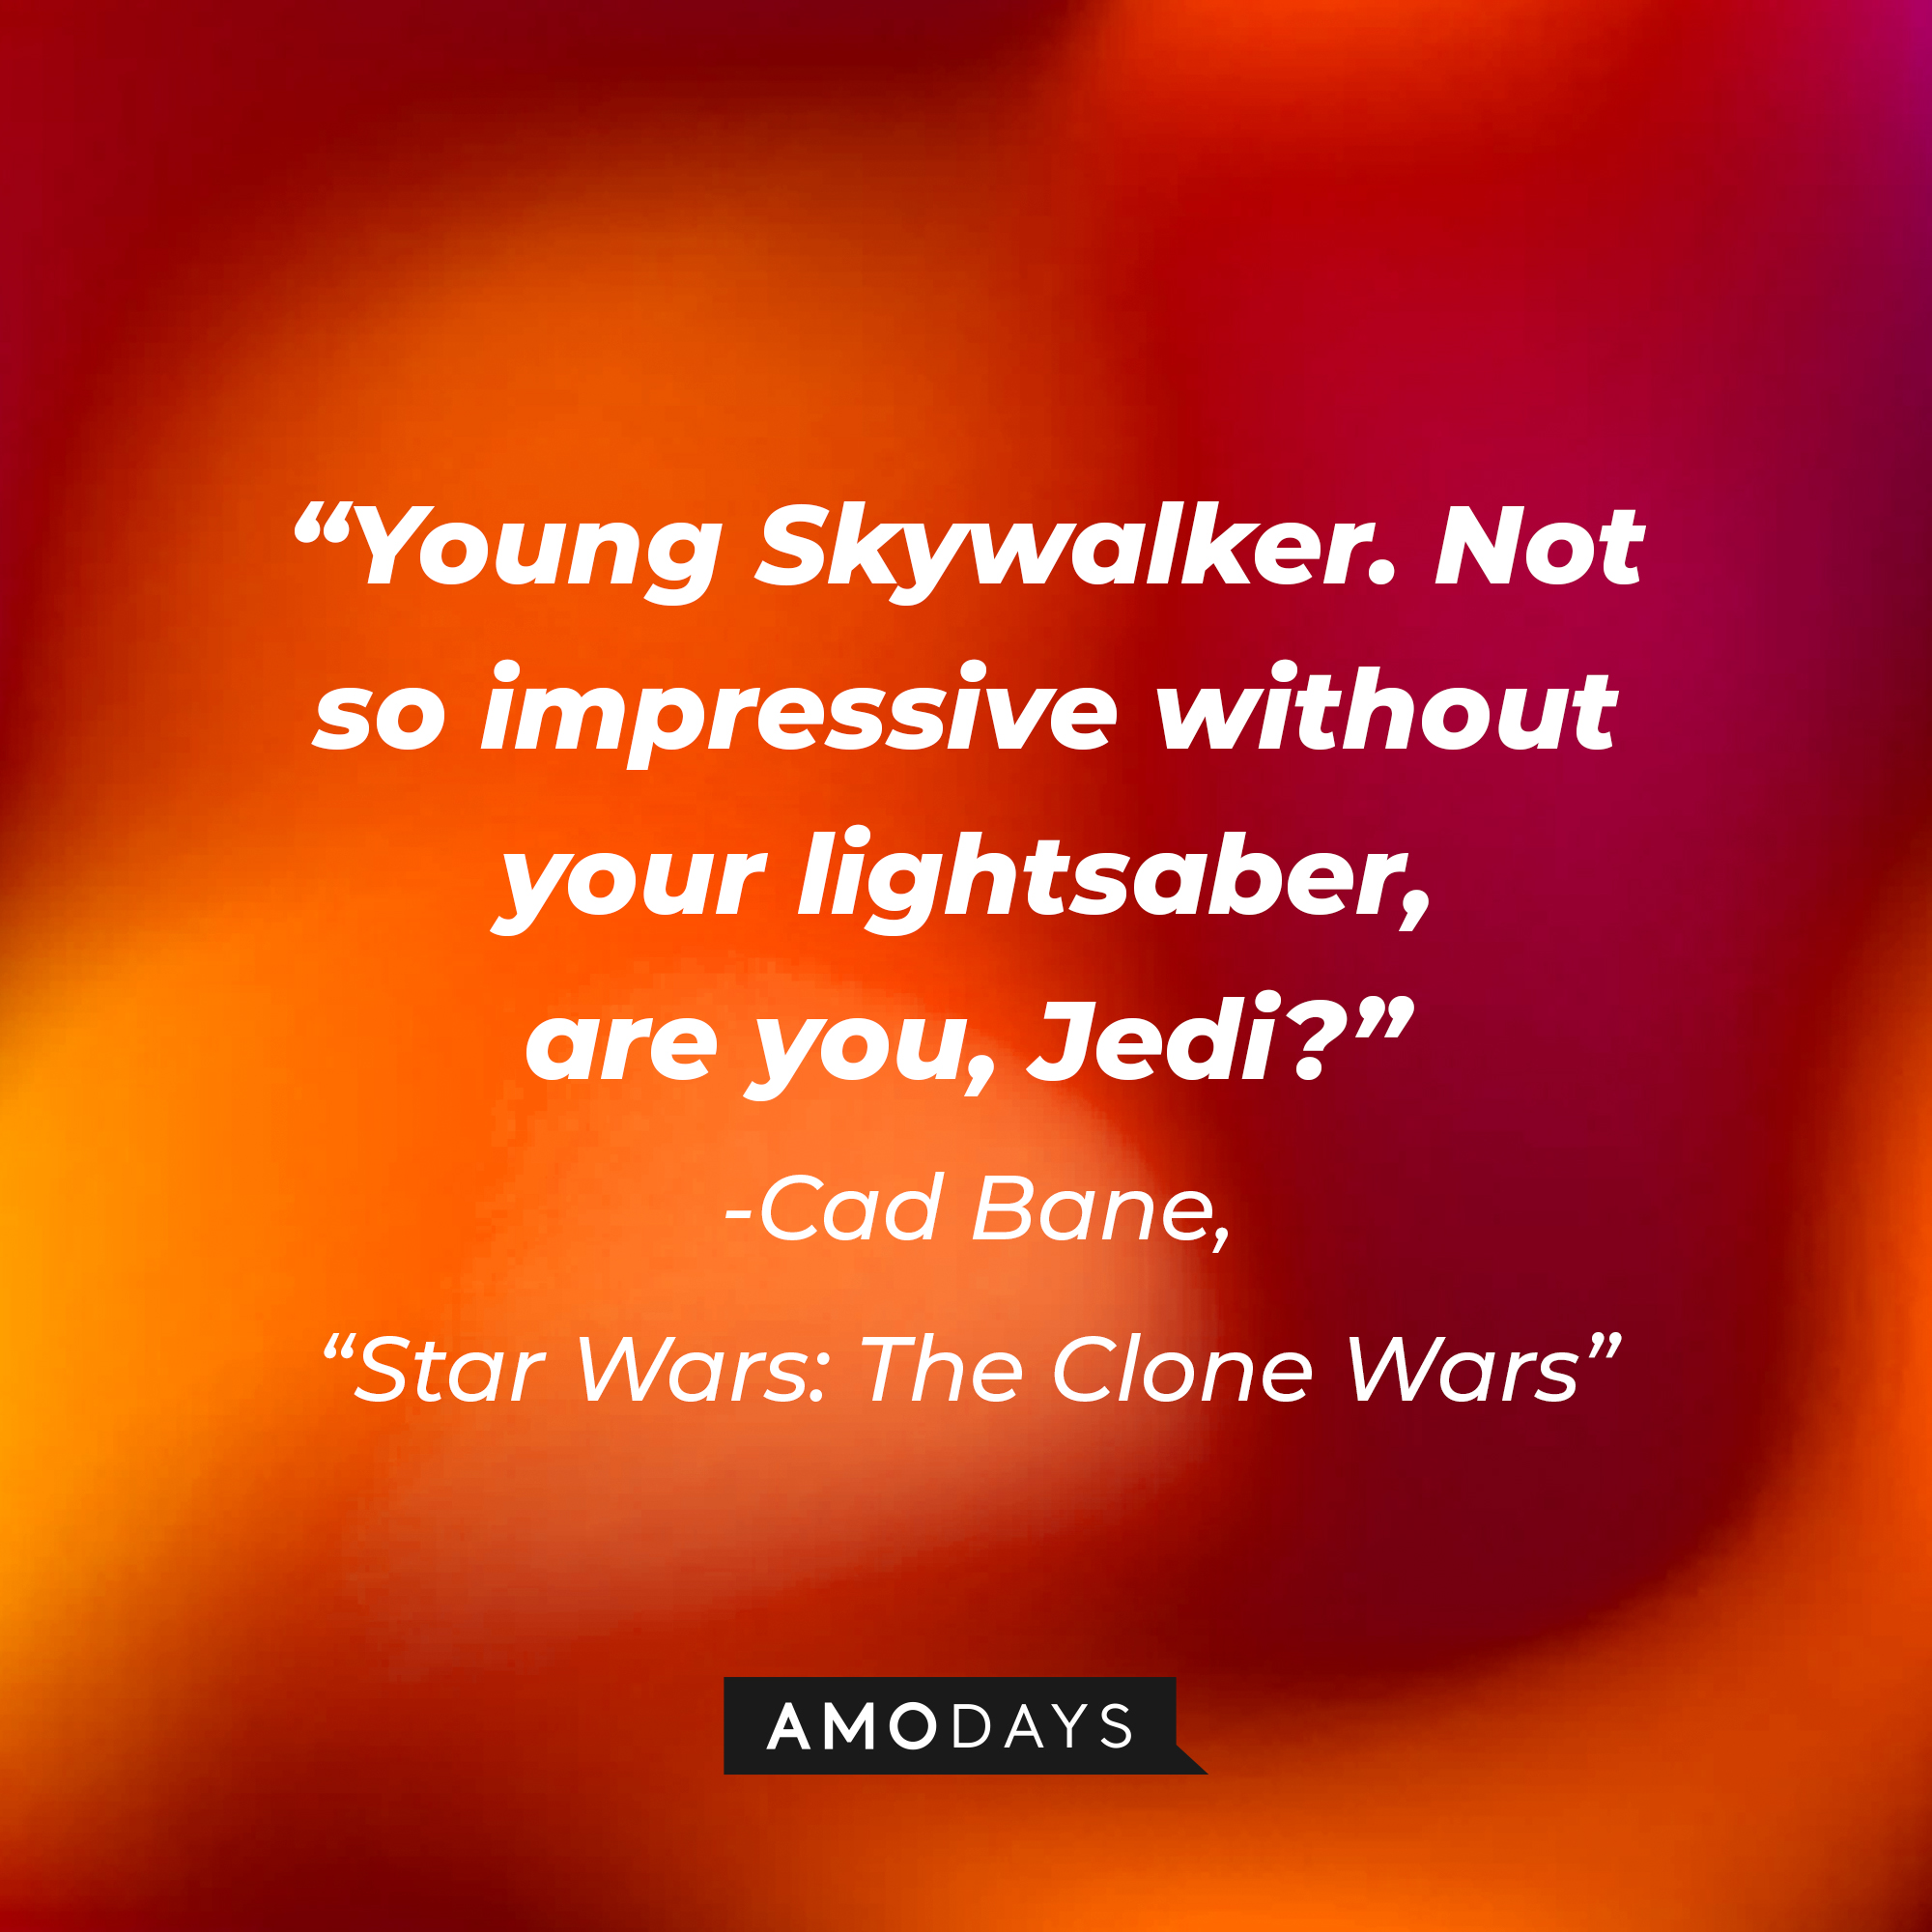 Cad Bane’s quote:  "Young Skywalker. Not so impressive without your lightsaber, are you, Jedi? " | Image: AmoDays